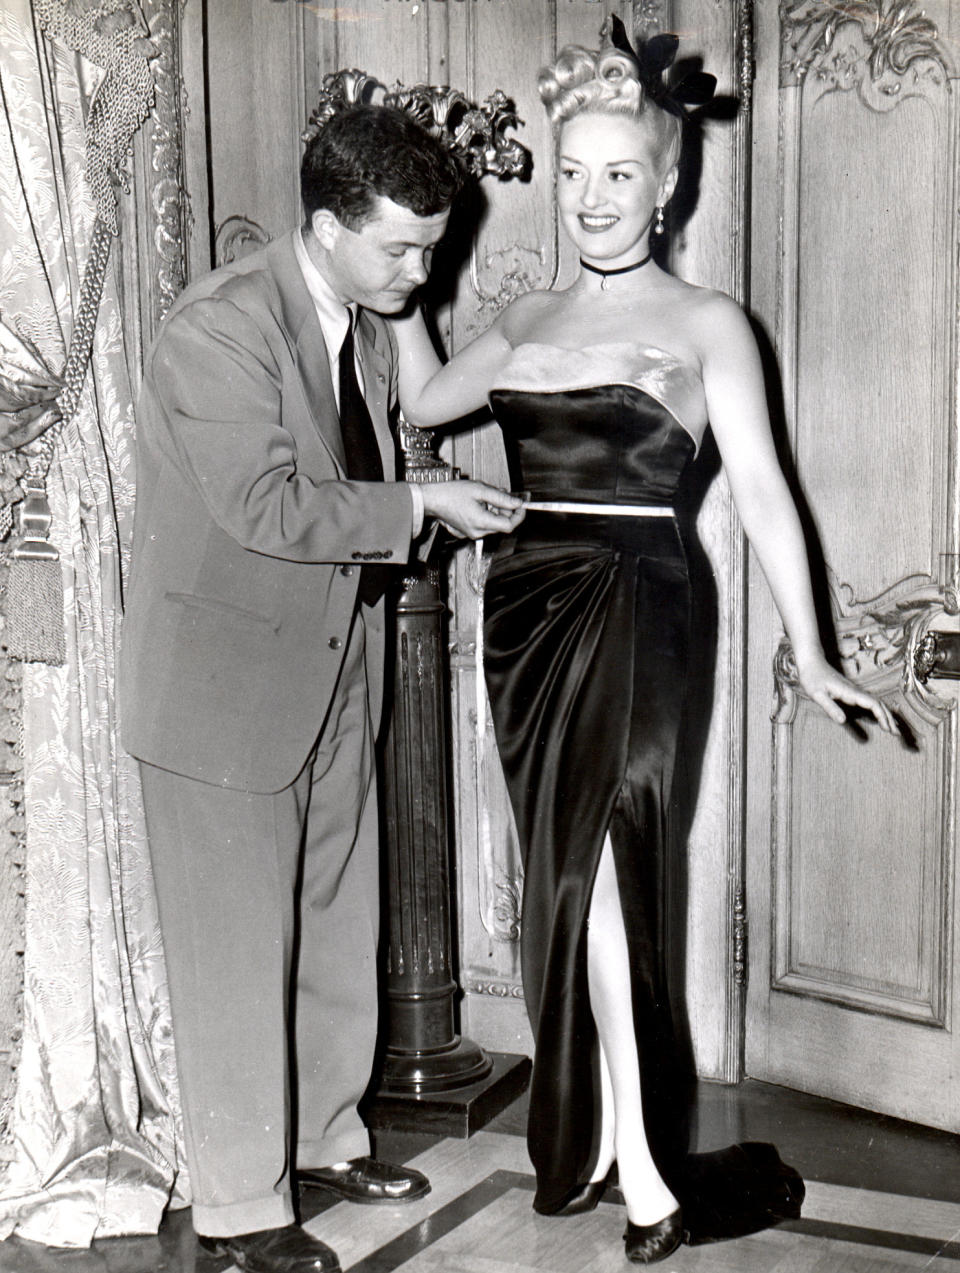 FILE - In this 1945 file photo, Associated Press reporter Bob Thomas measures the waist of legendary pinup queen Betty Grable. Thomas, the longtime Associated Press reporter who kept the world informed on the comings and goings of Hollywood's biggest stars, died of age-related illnesses Friday, March 14, 2014 at his Encino, Calif., home, his daughter Janet Thomas said. He was 92. (AP Photo/Courtesy Bob Thomas, File)